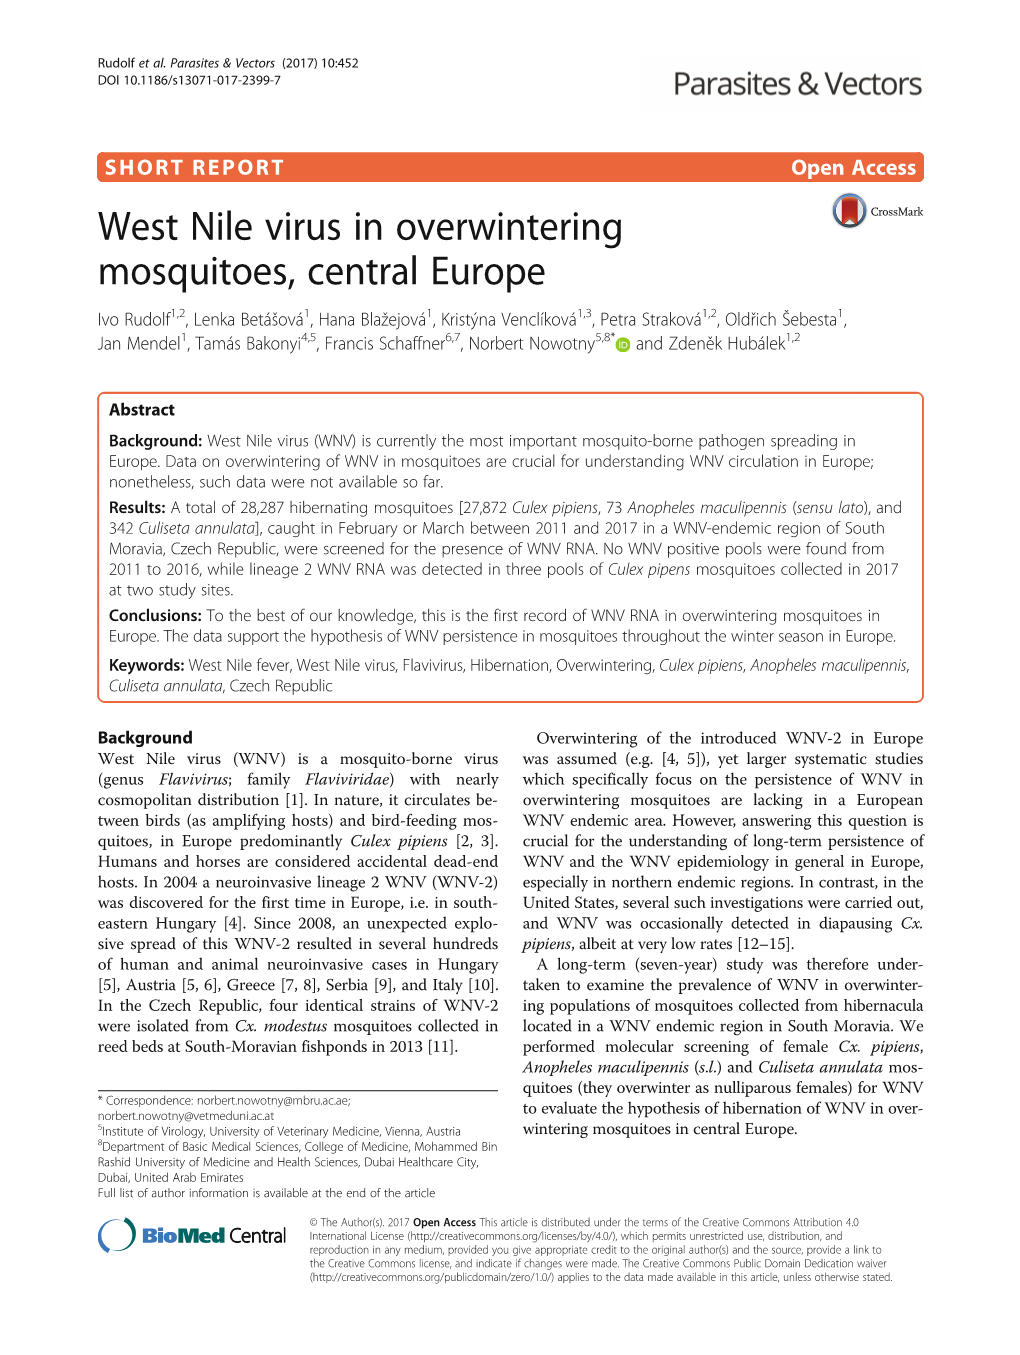 West Nile Virus in Overwintering Mosquitoes, Central Europe